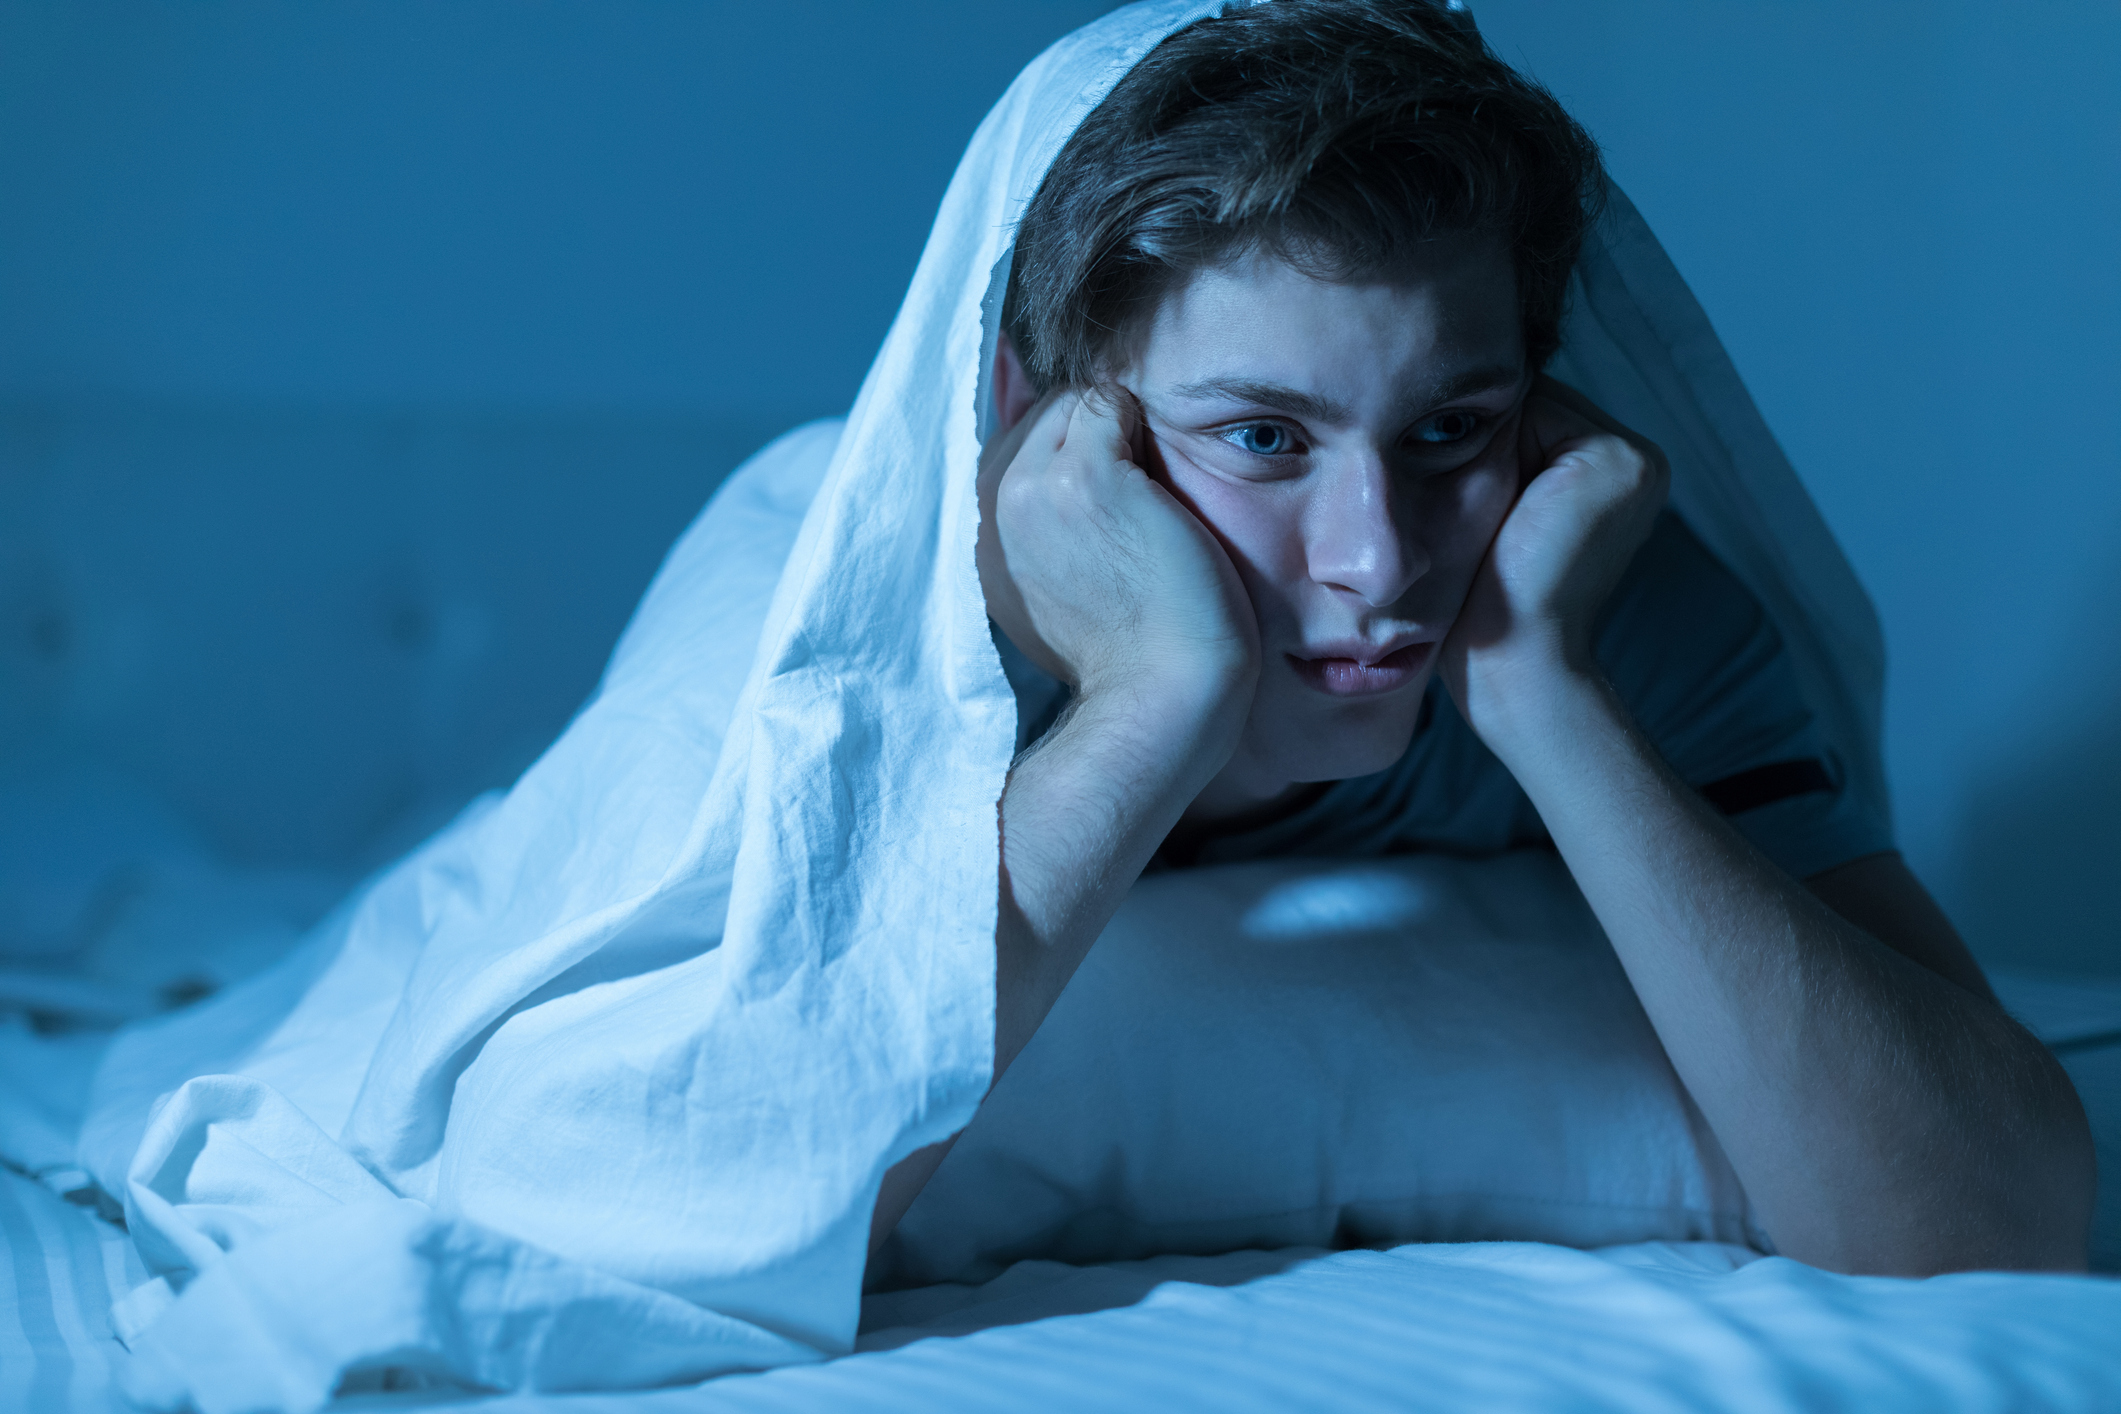 Man with insomnia and trouble sleeping sitting up in bed underneath a sheet